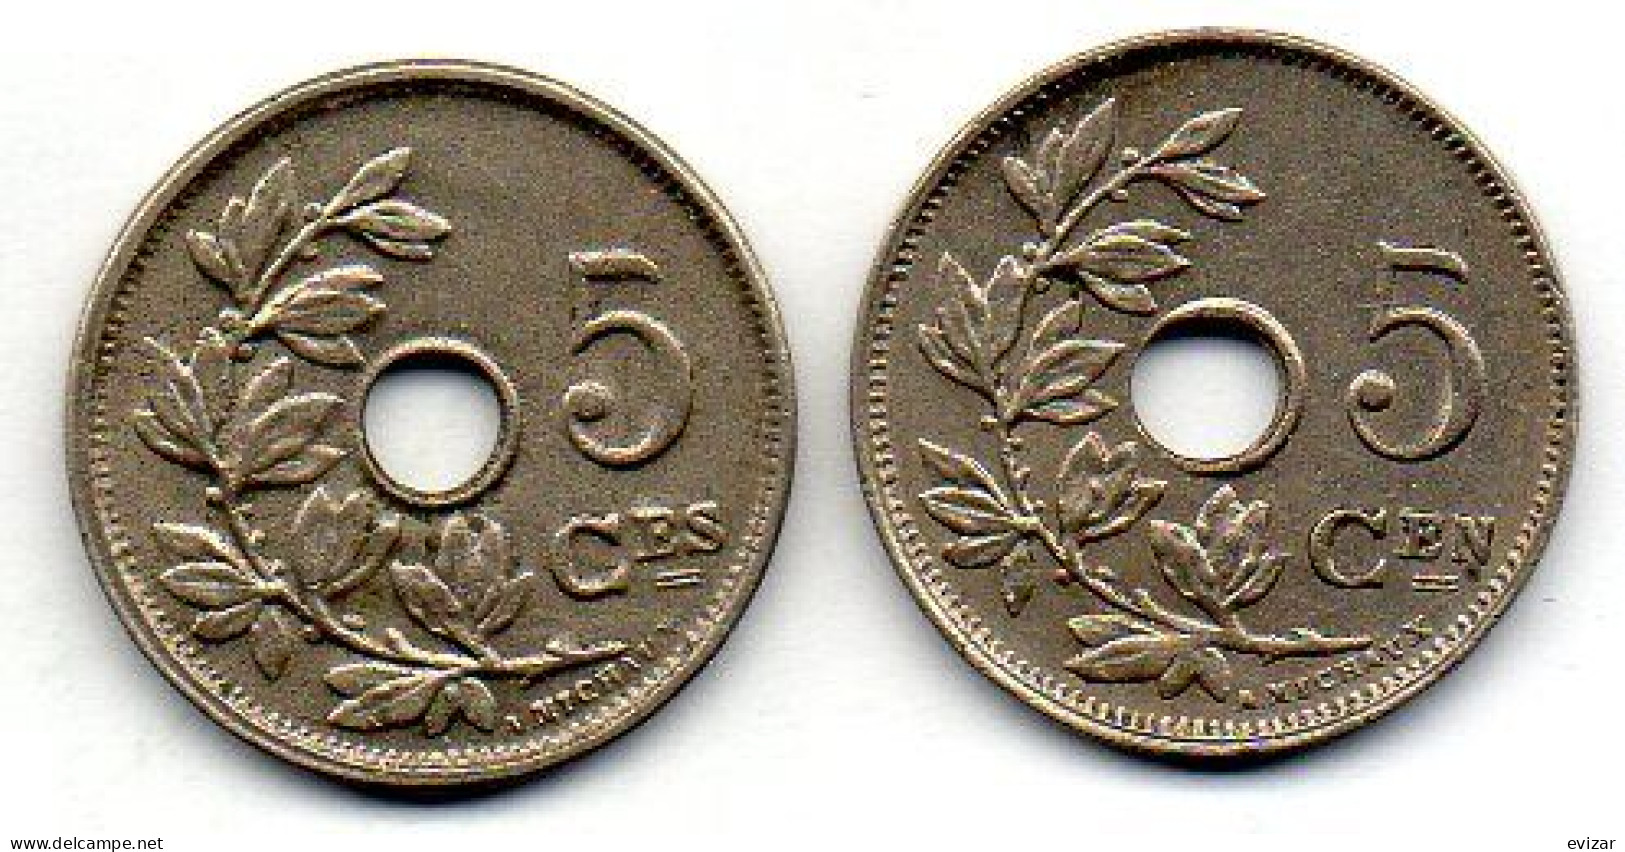 BELGIUM - Set Of Two Coins 5 Centimes, Copper-Nickel, Year 1920, 1924, KM # 66, 67, French & Dutch Legend - 5 Cents